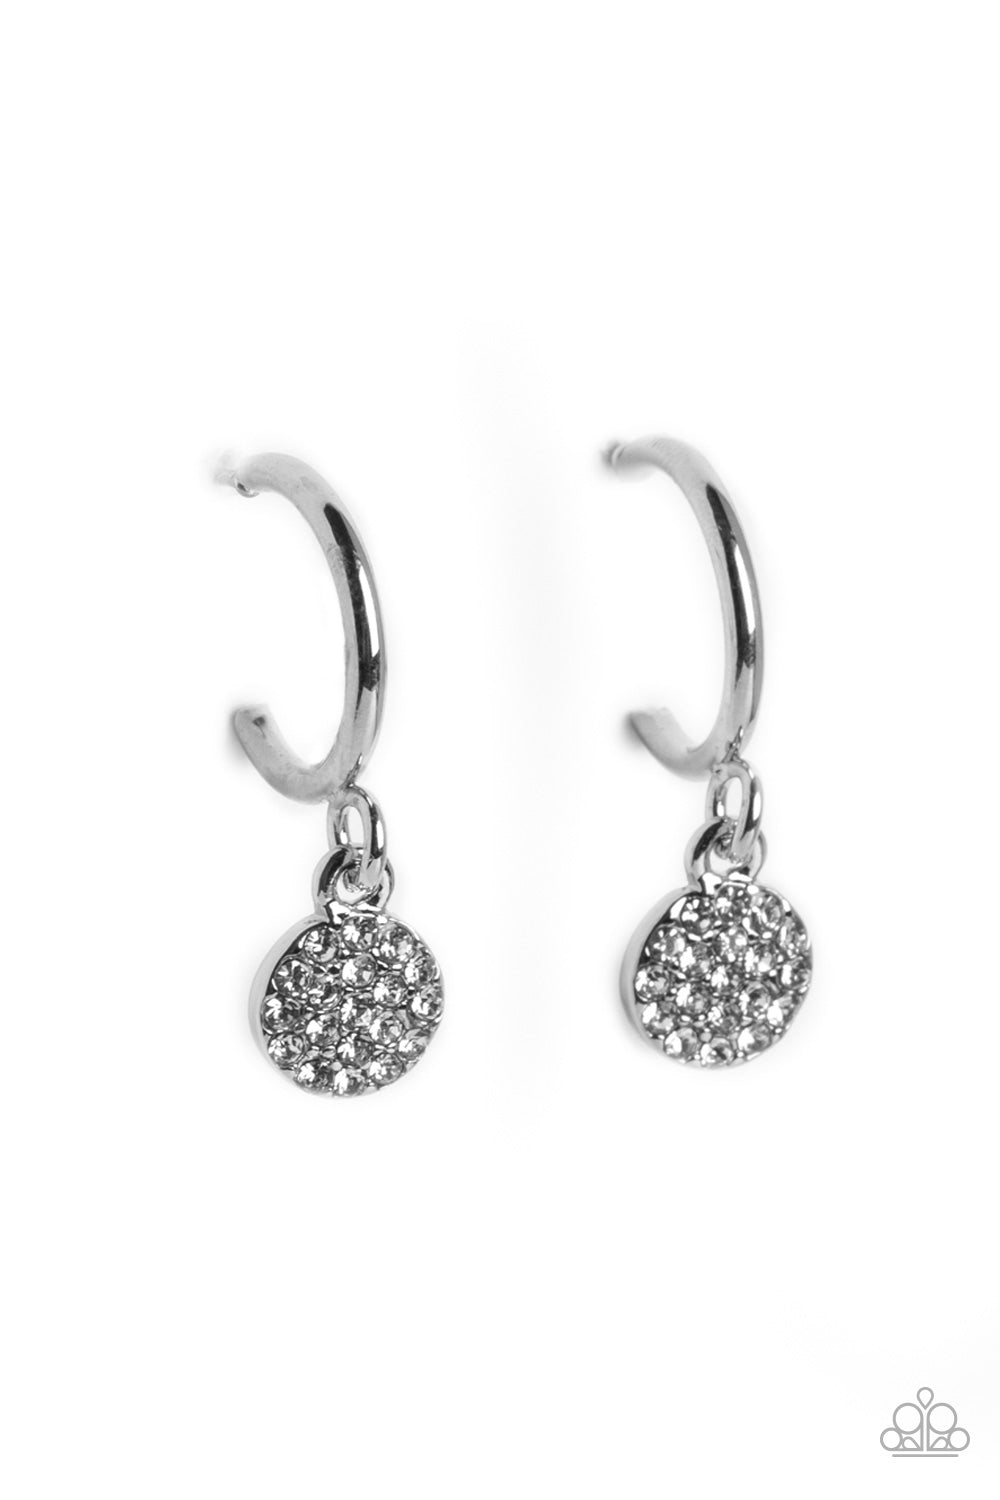 Paparazzi Accessories - Bodacious Ballroom - White Hoop Earrings swinging from a glistening silver hoop, a dainty silver disc, embossed with white rhinestones glimmers, adding a subtle shimmer around the ear. Earring attaches to a standard post fitting. Hoop measures approximately 1/2" in diameter.  Sold as one pair of hoop earrings.